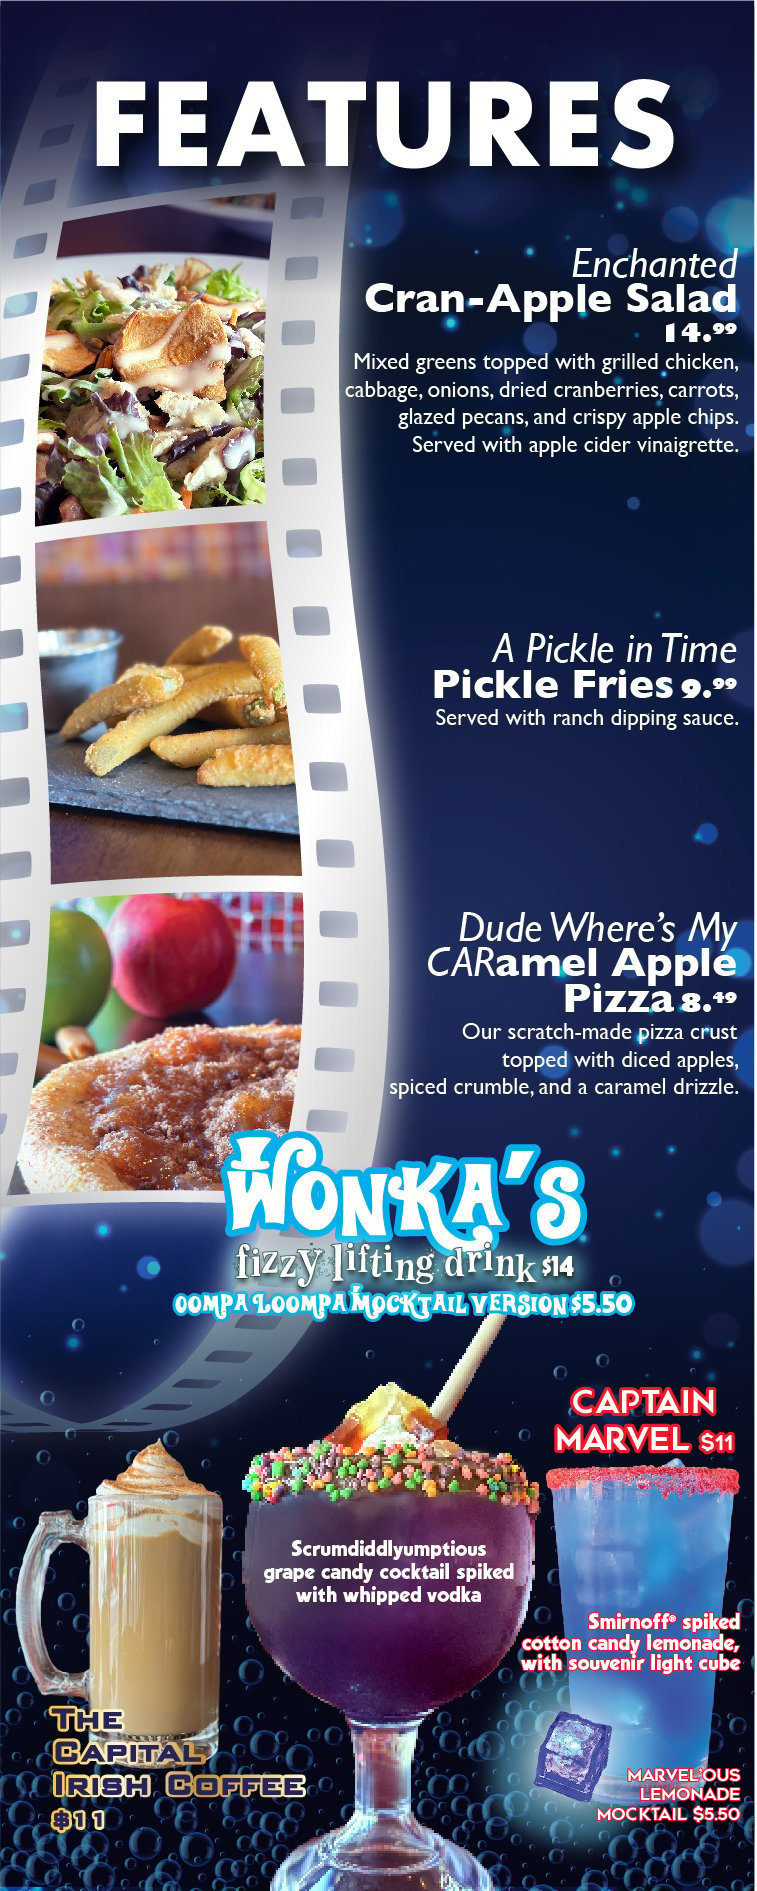 Current Features - Enchanted Cranapple Salad, A Pickle in Time Pickle Fries, Dude Where's my CARamel Apple Pizza. Cocktails: Wonka's Fizzy Lifting Drink, The Capital Irish Coffee, Captain Marvel